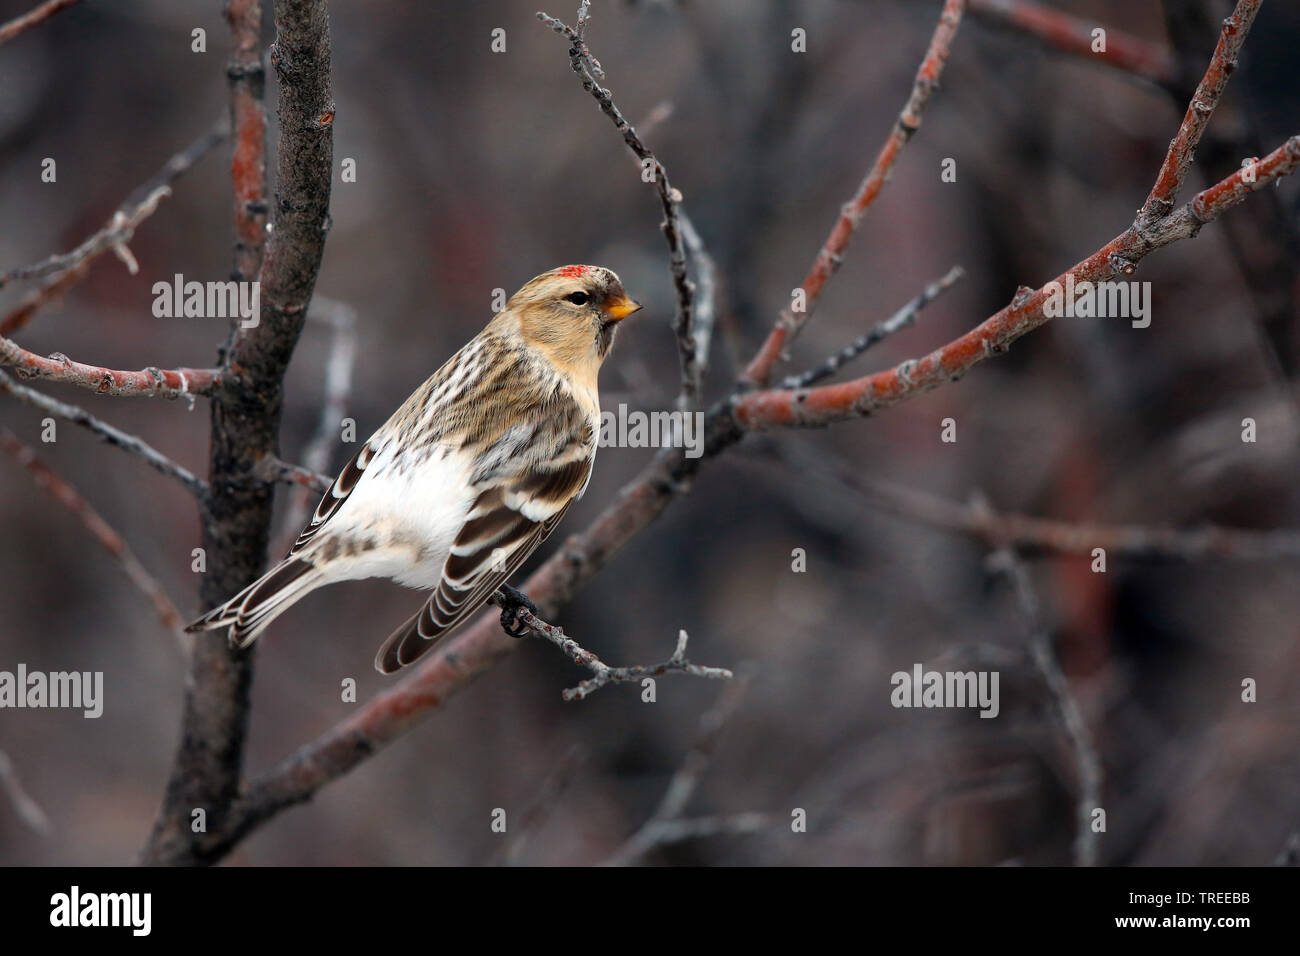 arctic redpoll, hoary redpoll (Carduelis hornemanni hornemanni, Acanthis hornemanni hornemanni), sitting on a branch, Greenland Stock Photo